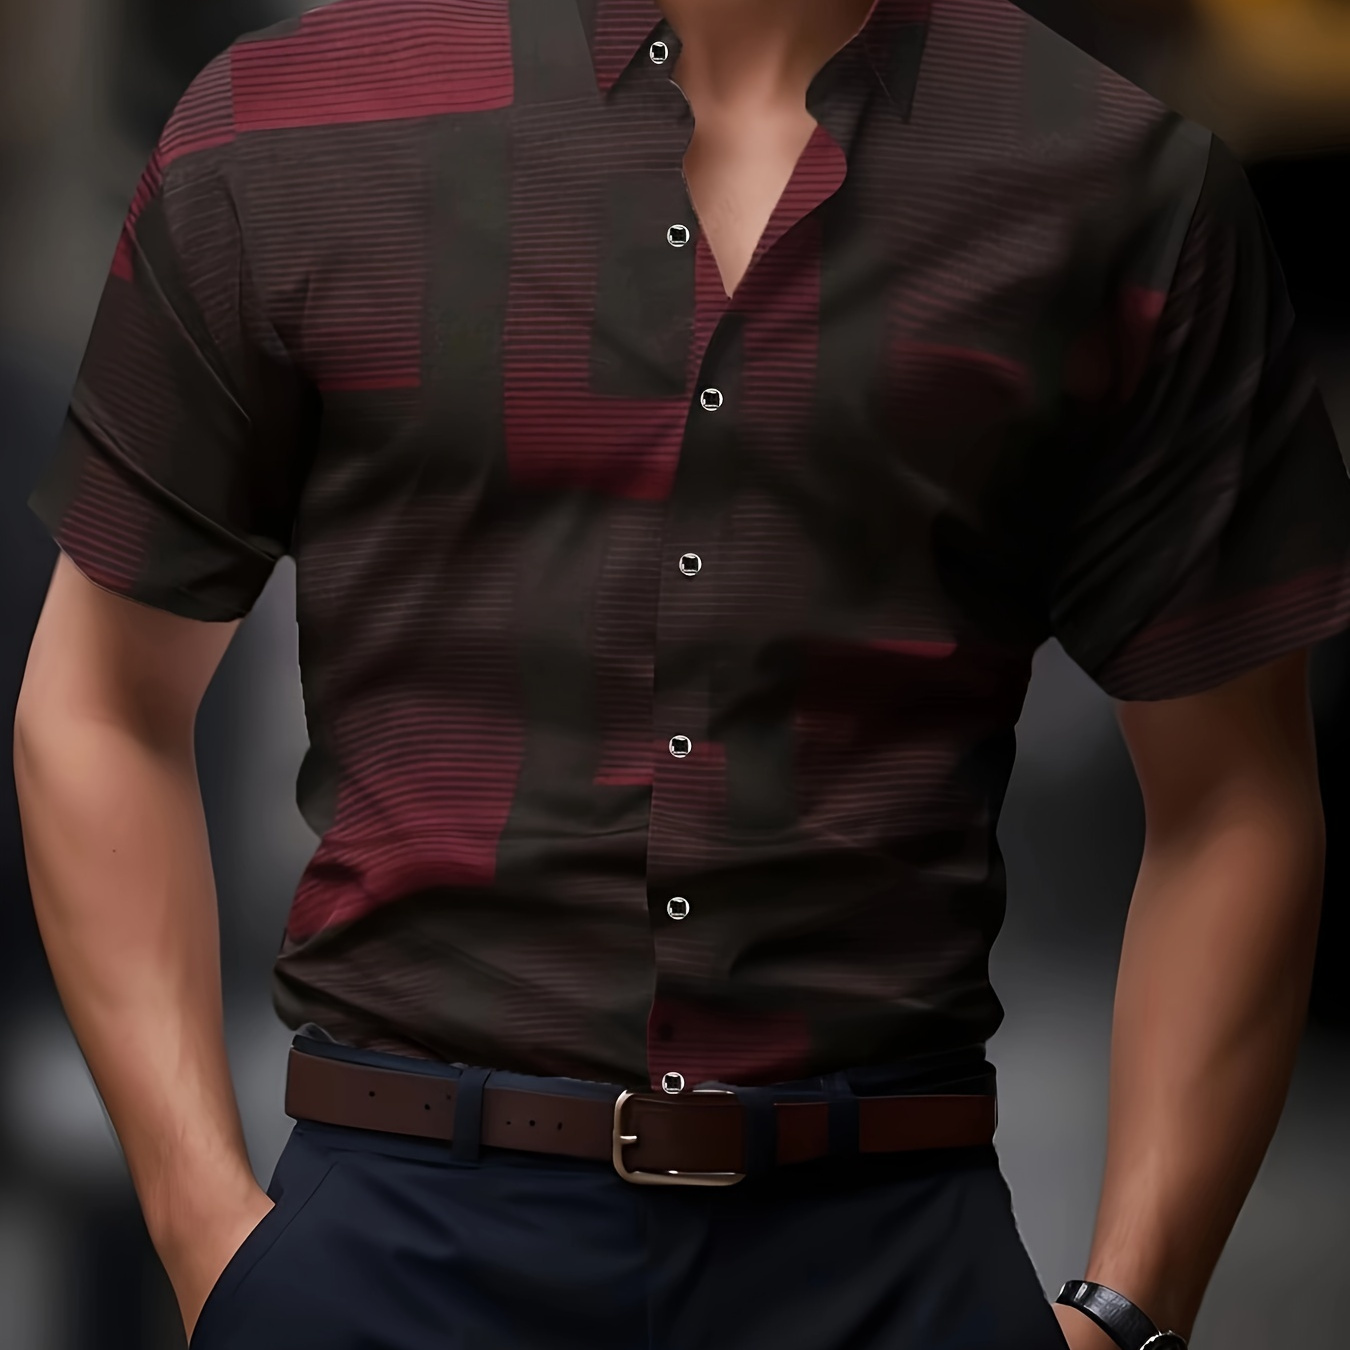 

Geometric Print Men's Summer Fashionable And Simple Short Sleeve Button Casual Lapel Shirt, Trendy And Versatile, Suitable For Dates, Beach Holiday, As Gifts